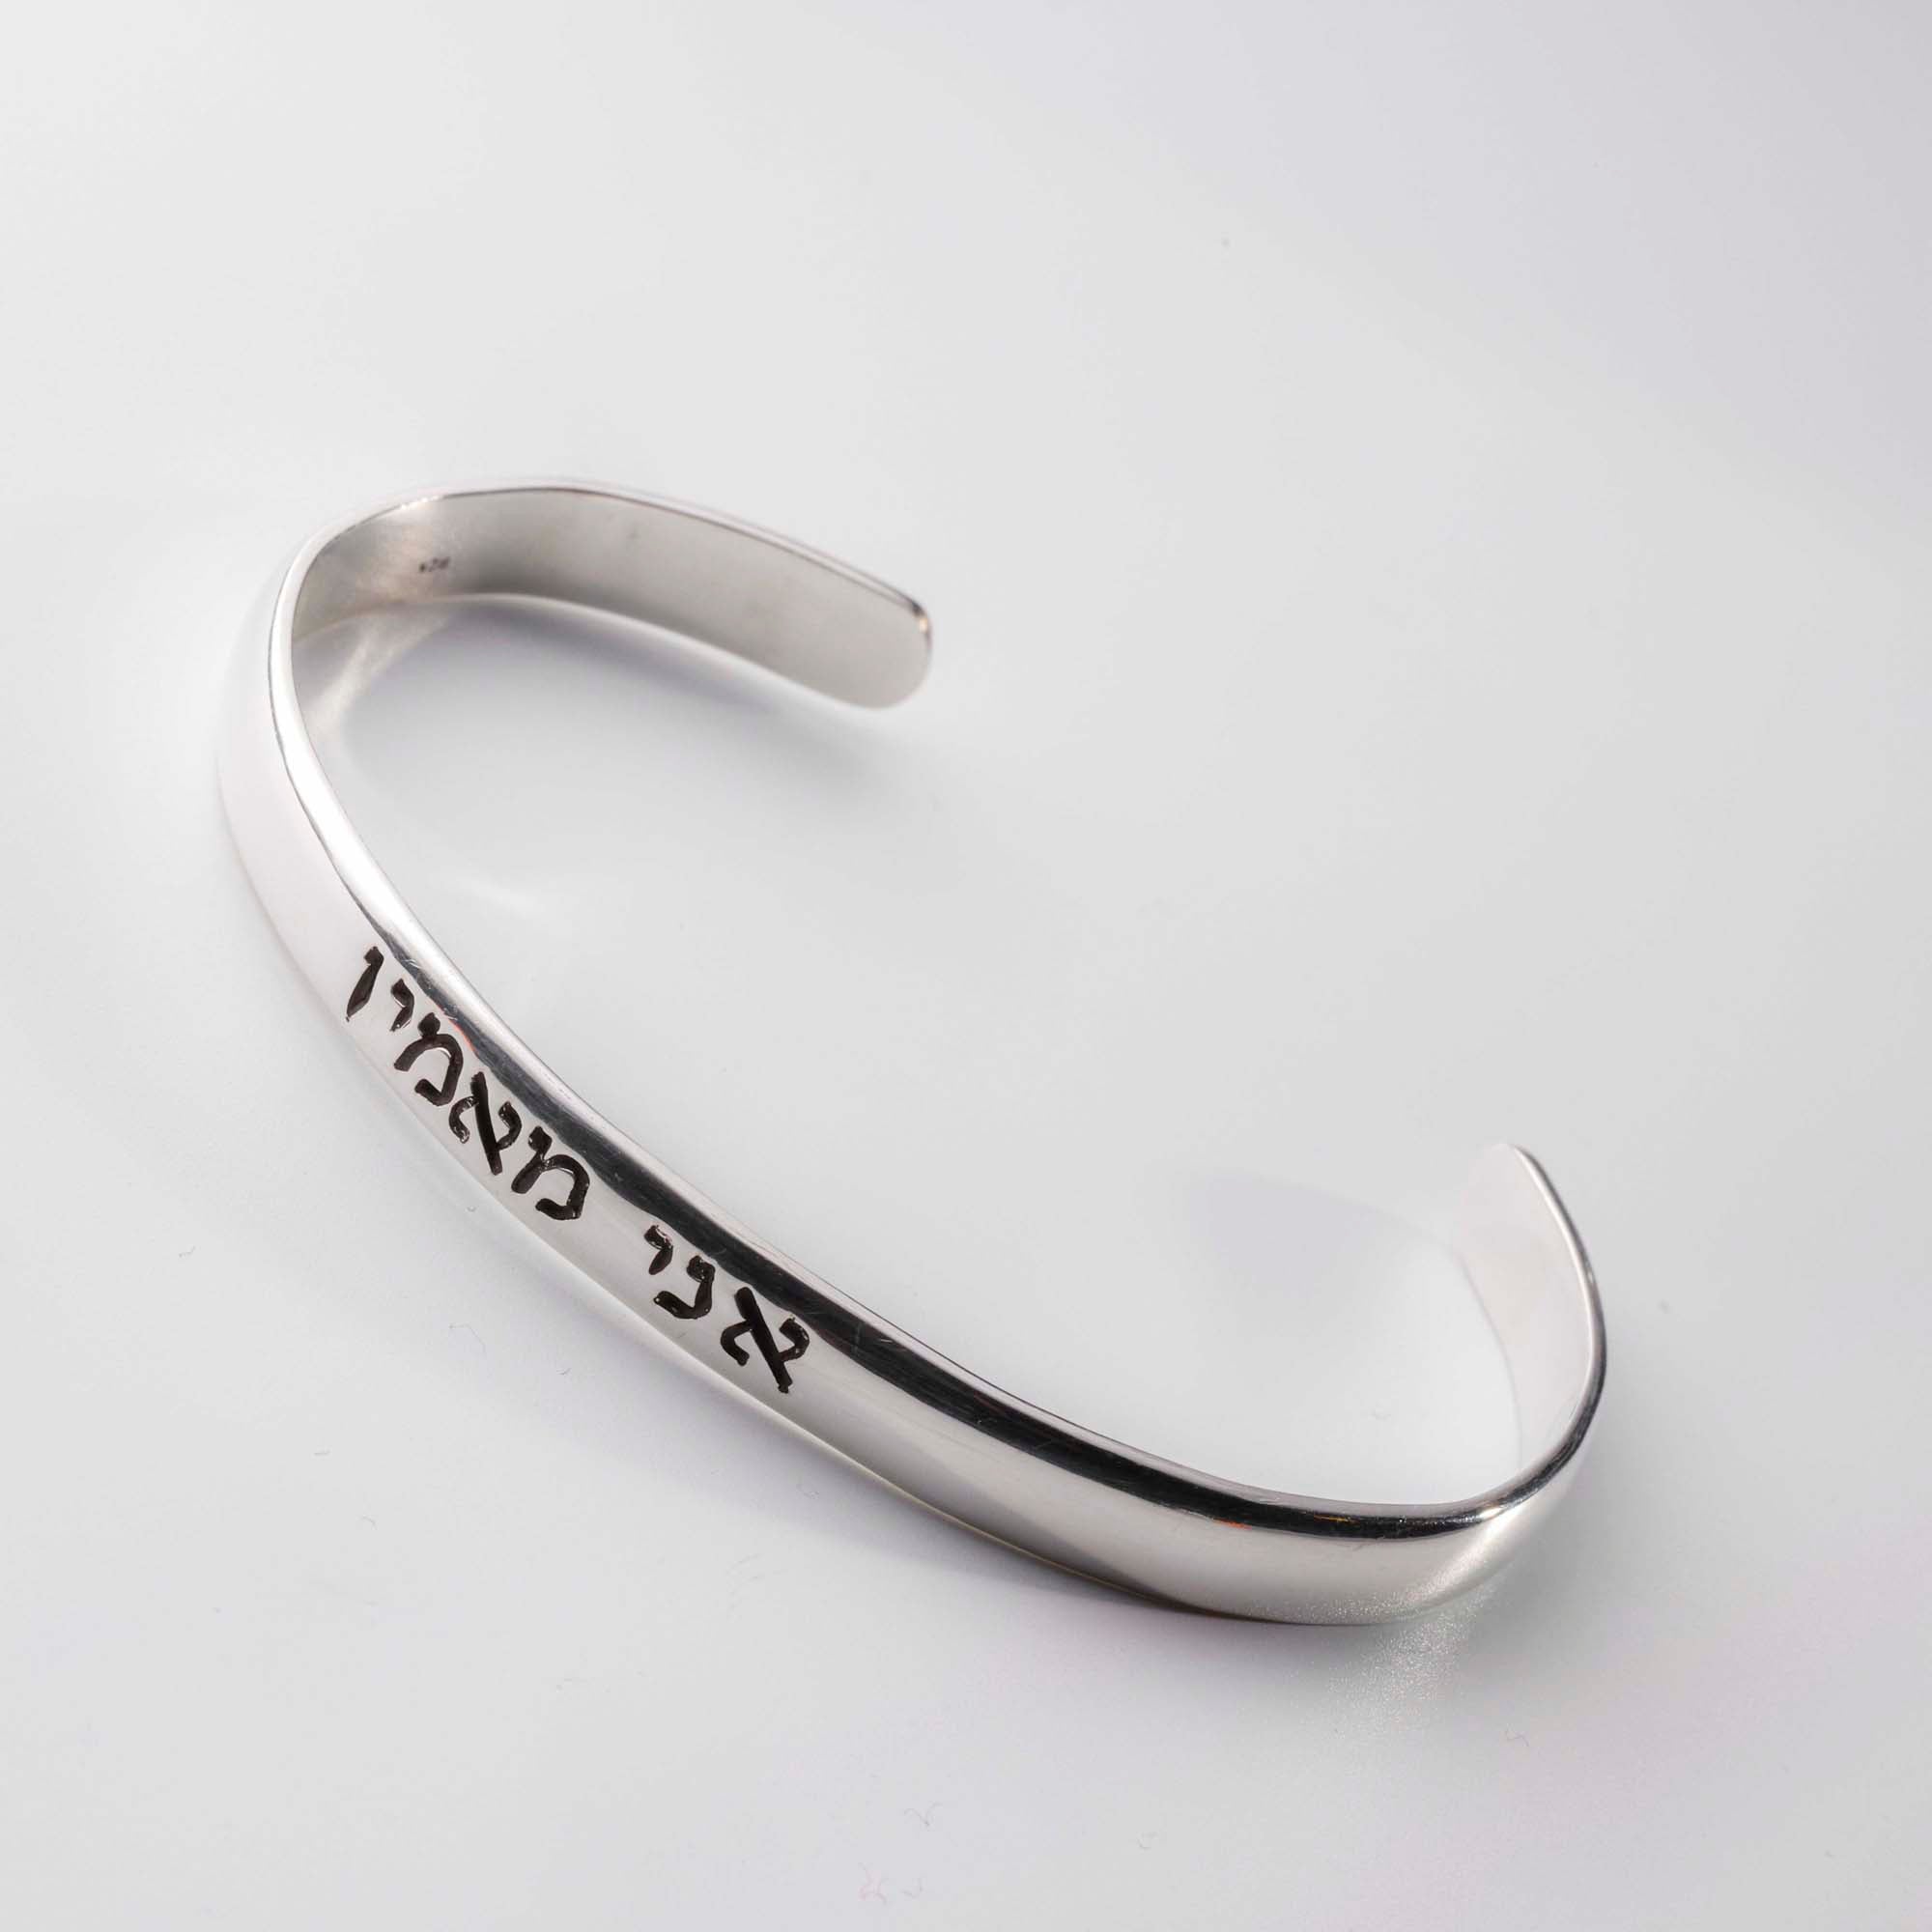 Cuff bangle with Inside & outside engravement